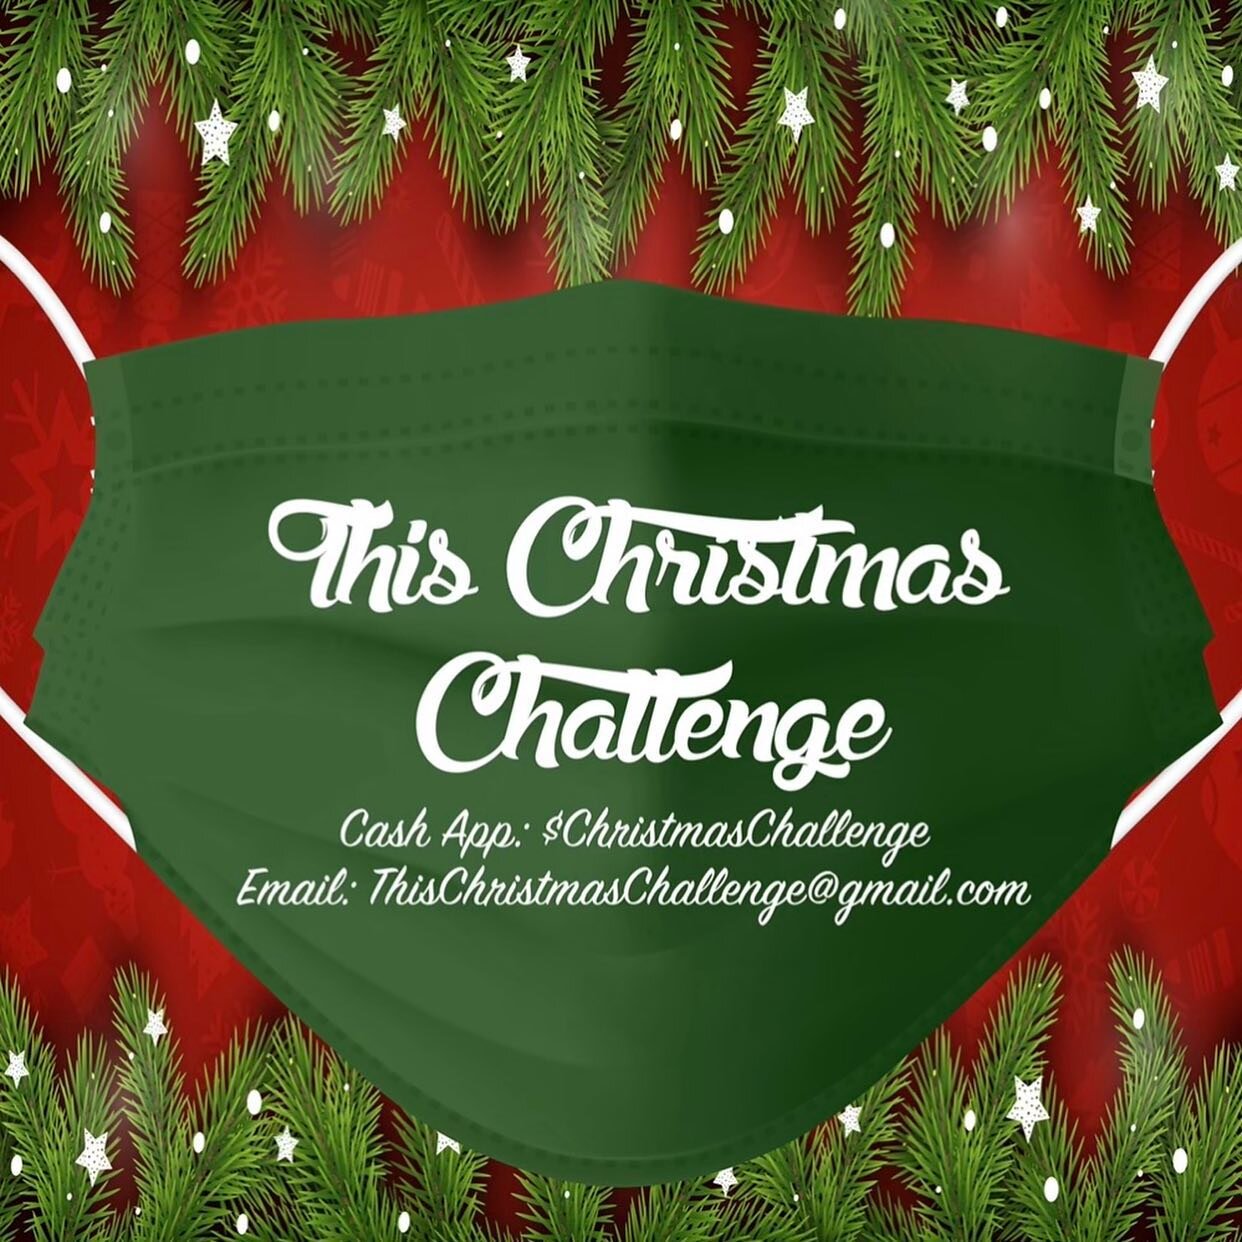 2020 has definitely been a interesting year that has greatly affected our daily lives but that has not stopped us from our mission. We are happy to say that we are bringing back #ThisChristmasChallenge to make a difference in our community. We are as